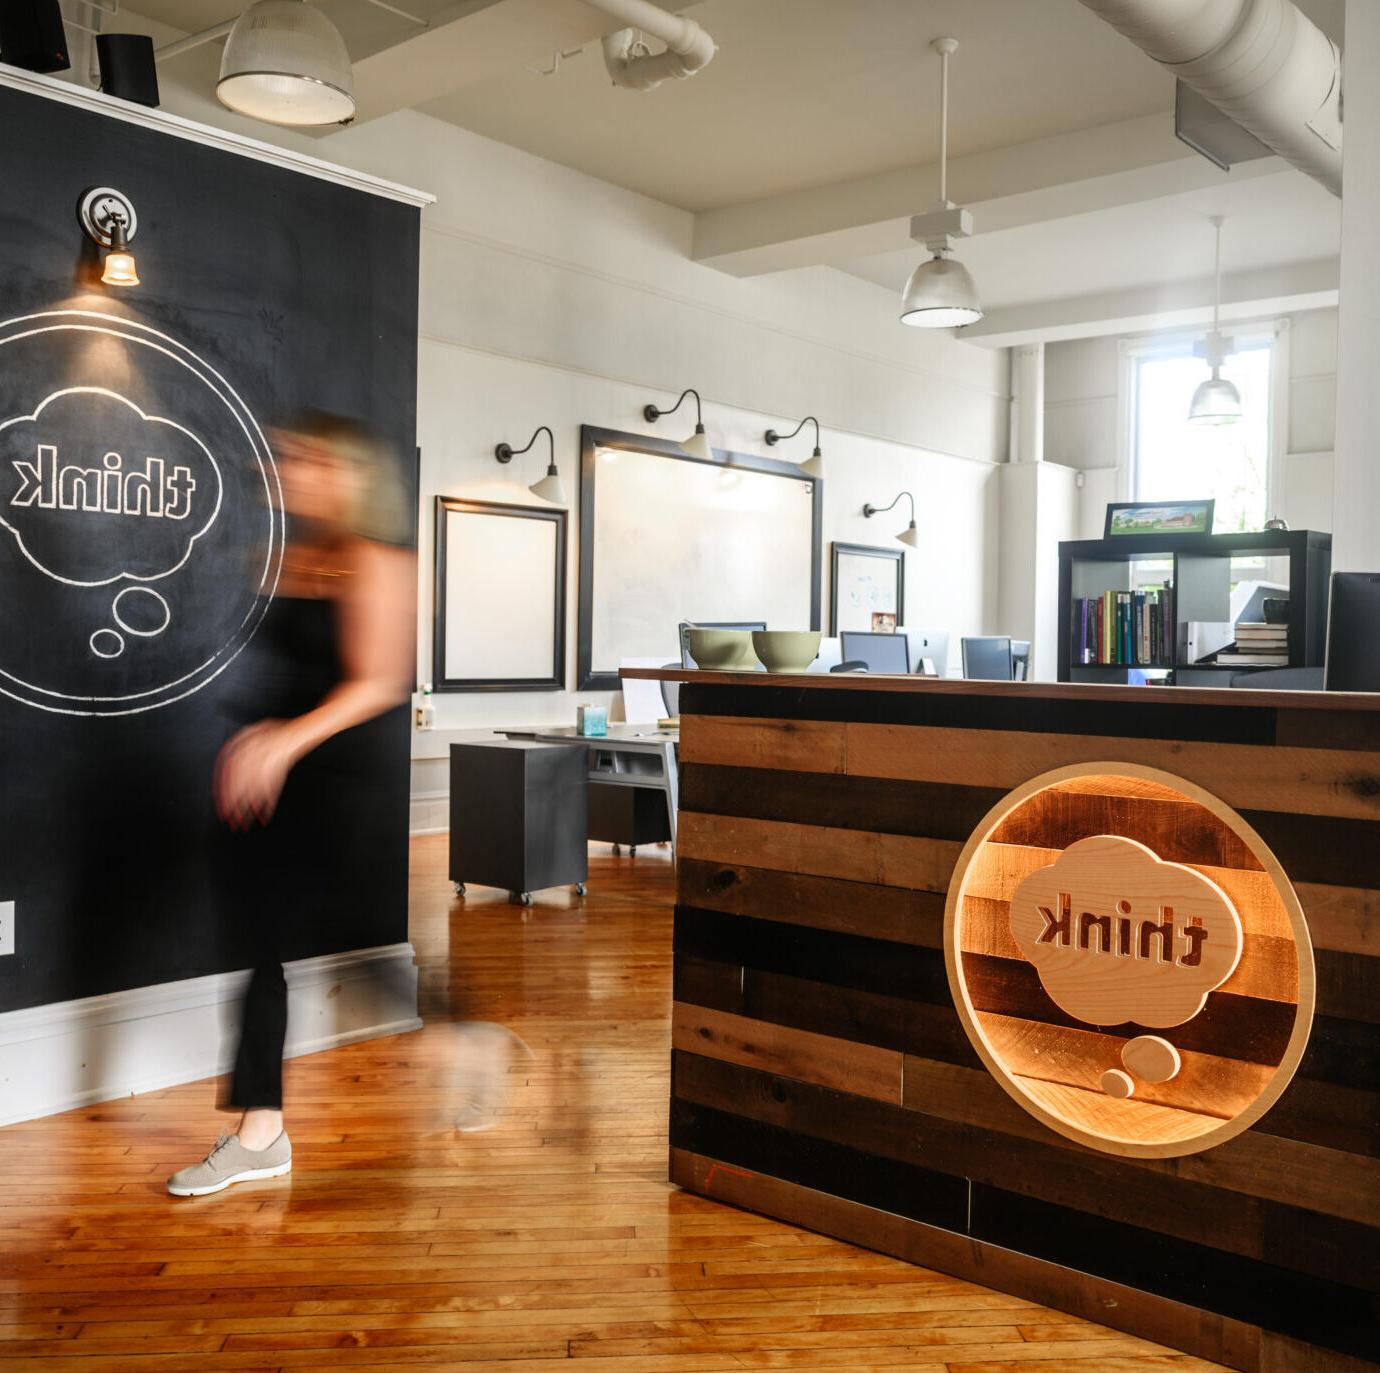 front desk with think logo and blurry person walking by